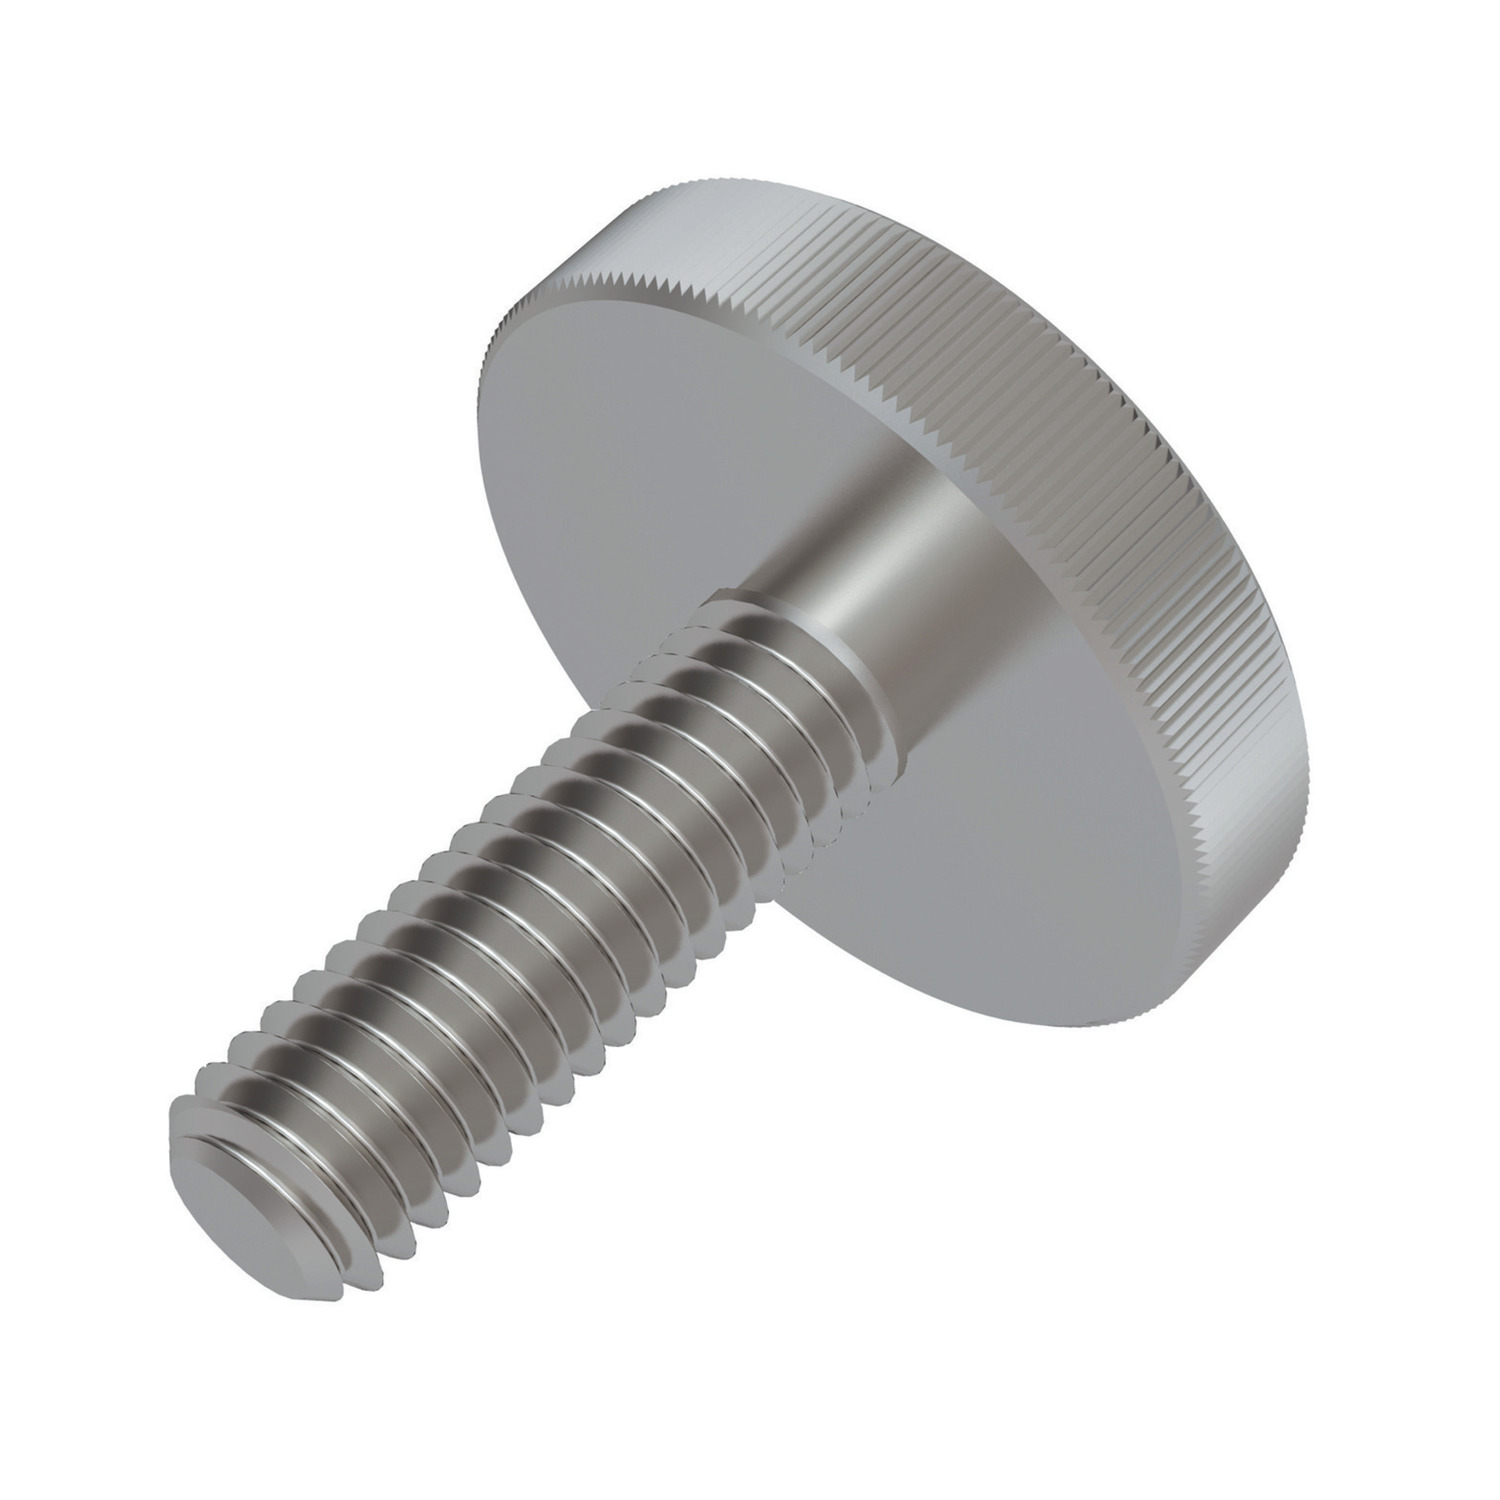 P0405.030-008-A2 Knurled Thumb Screw M3x8 A2 s/s 